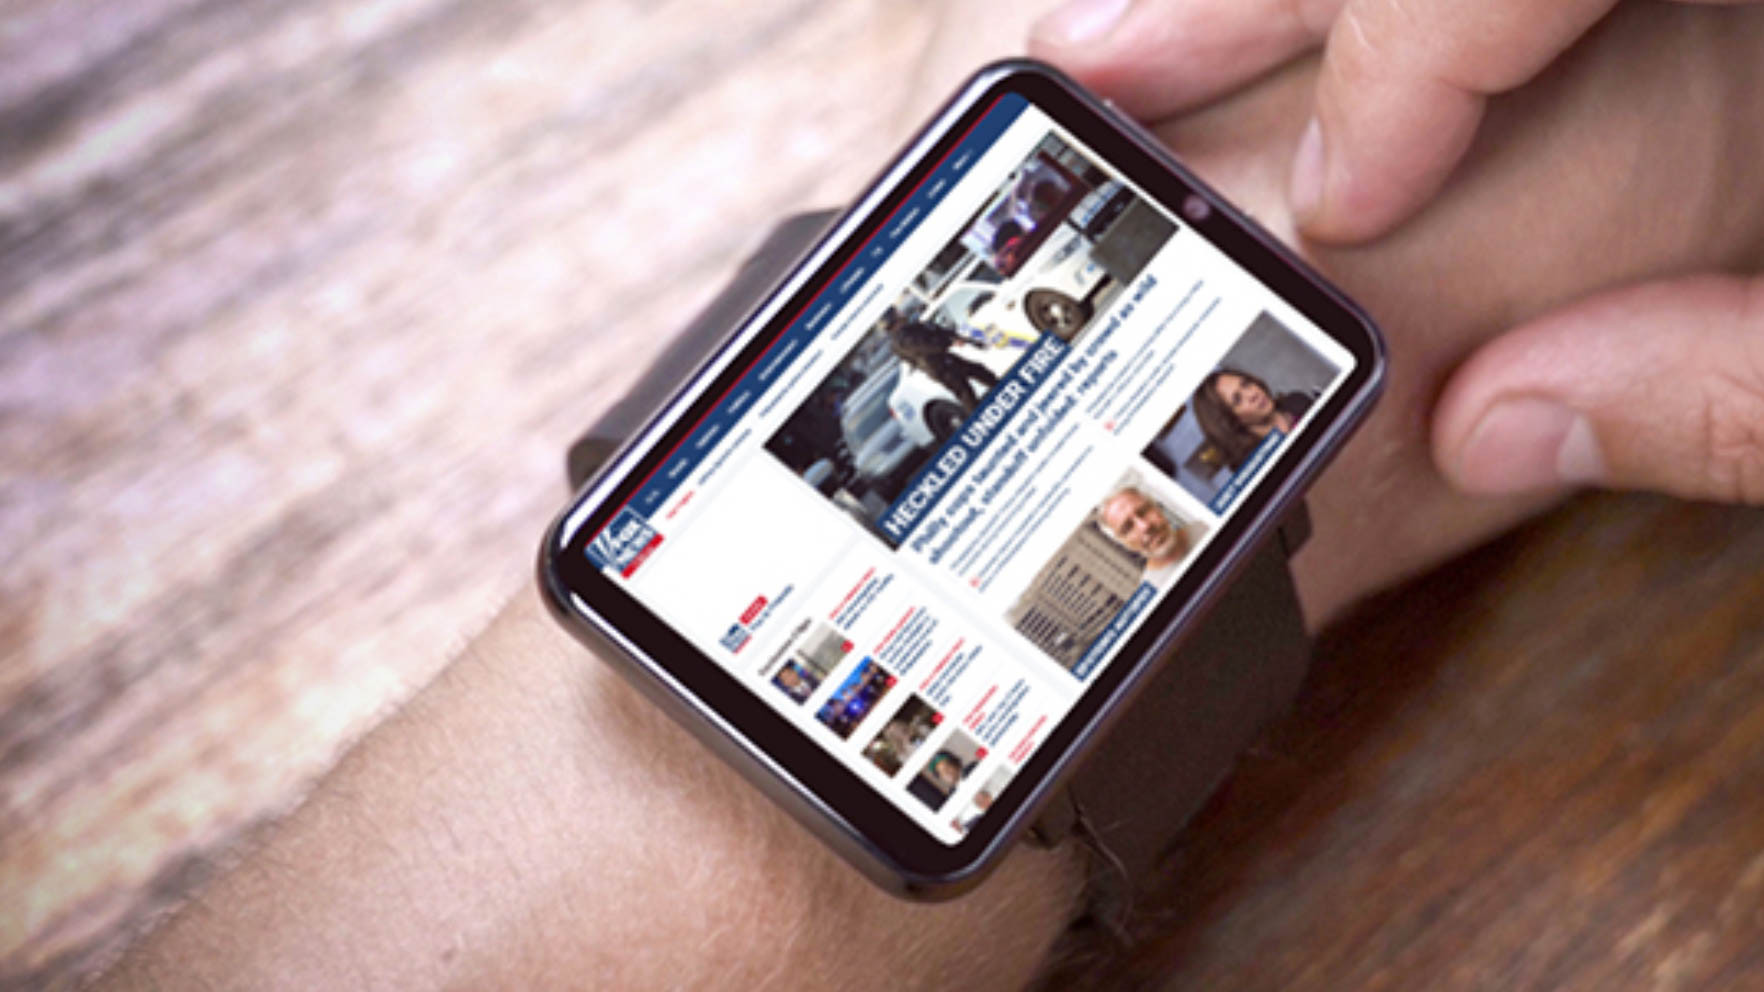 mega smartwatch is more powerful than your smartphone! |